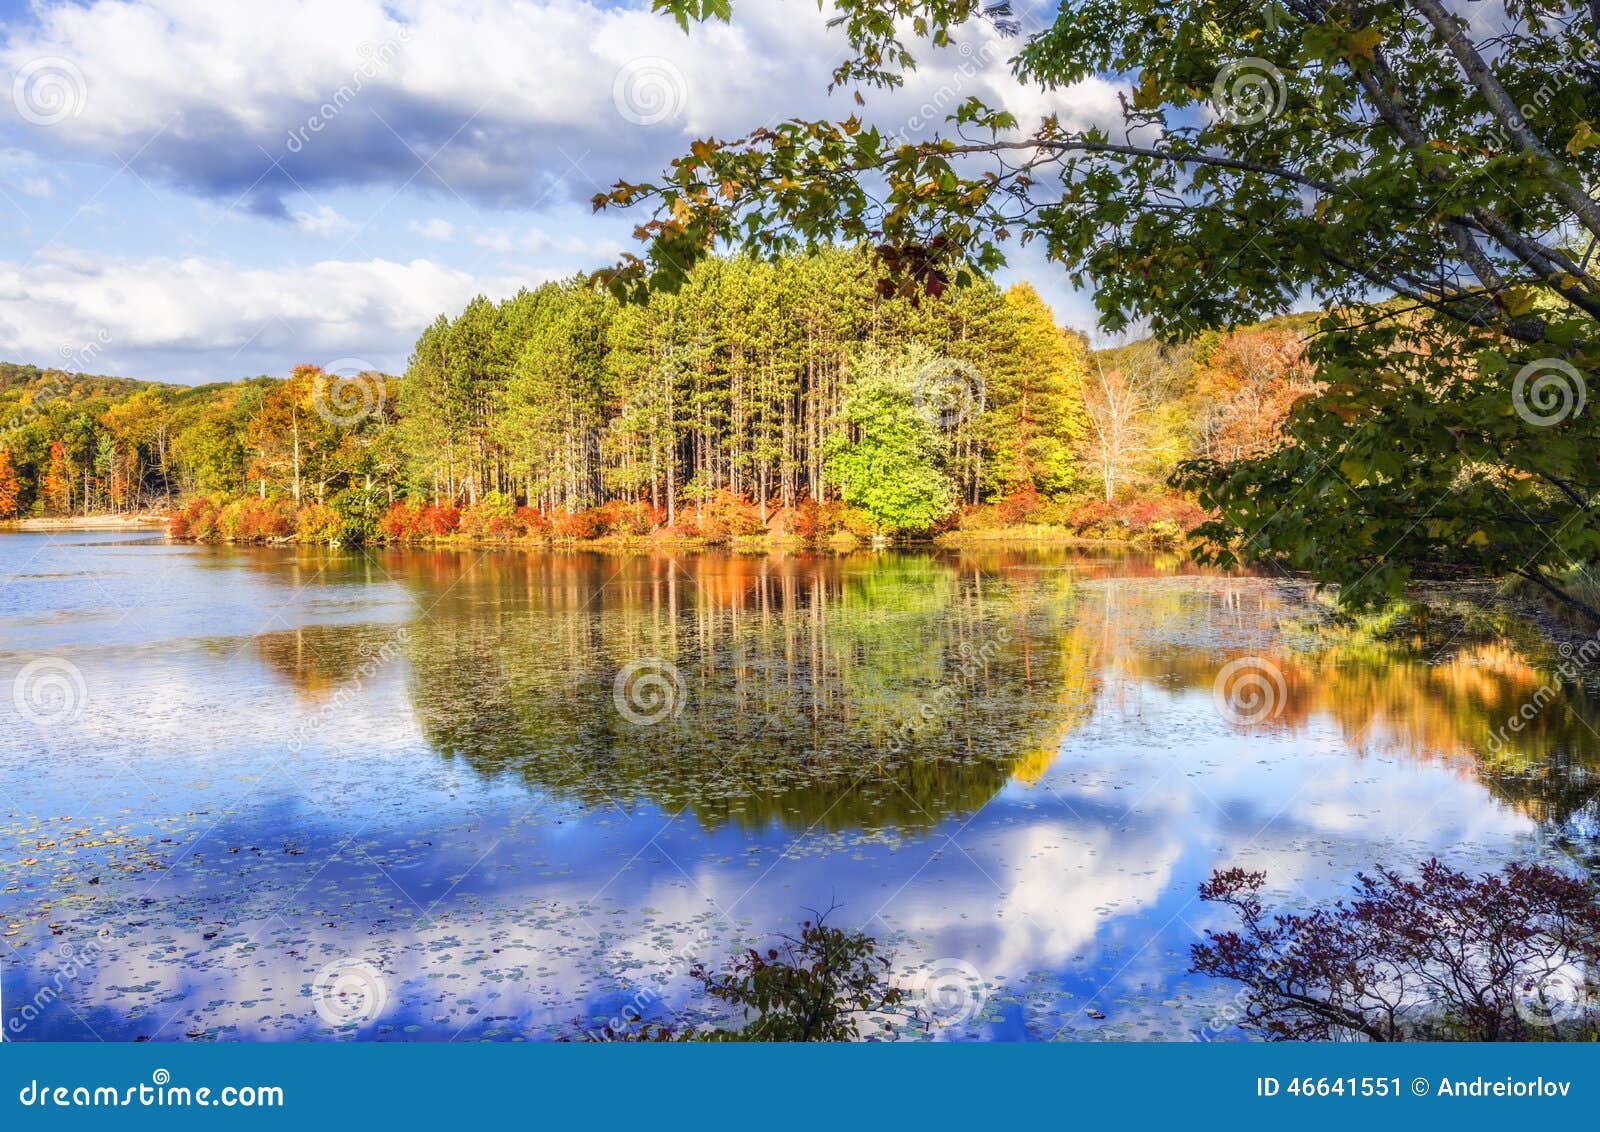 colorful fall scenery landscapes.